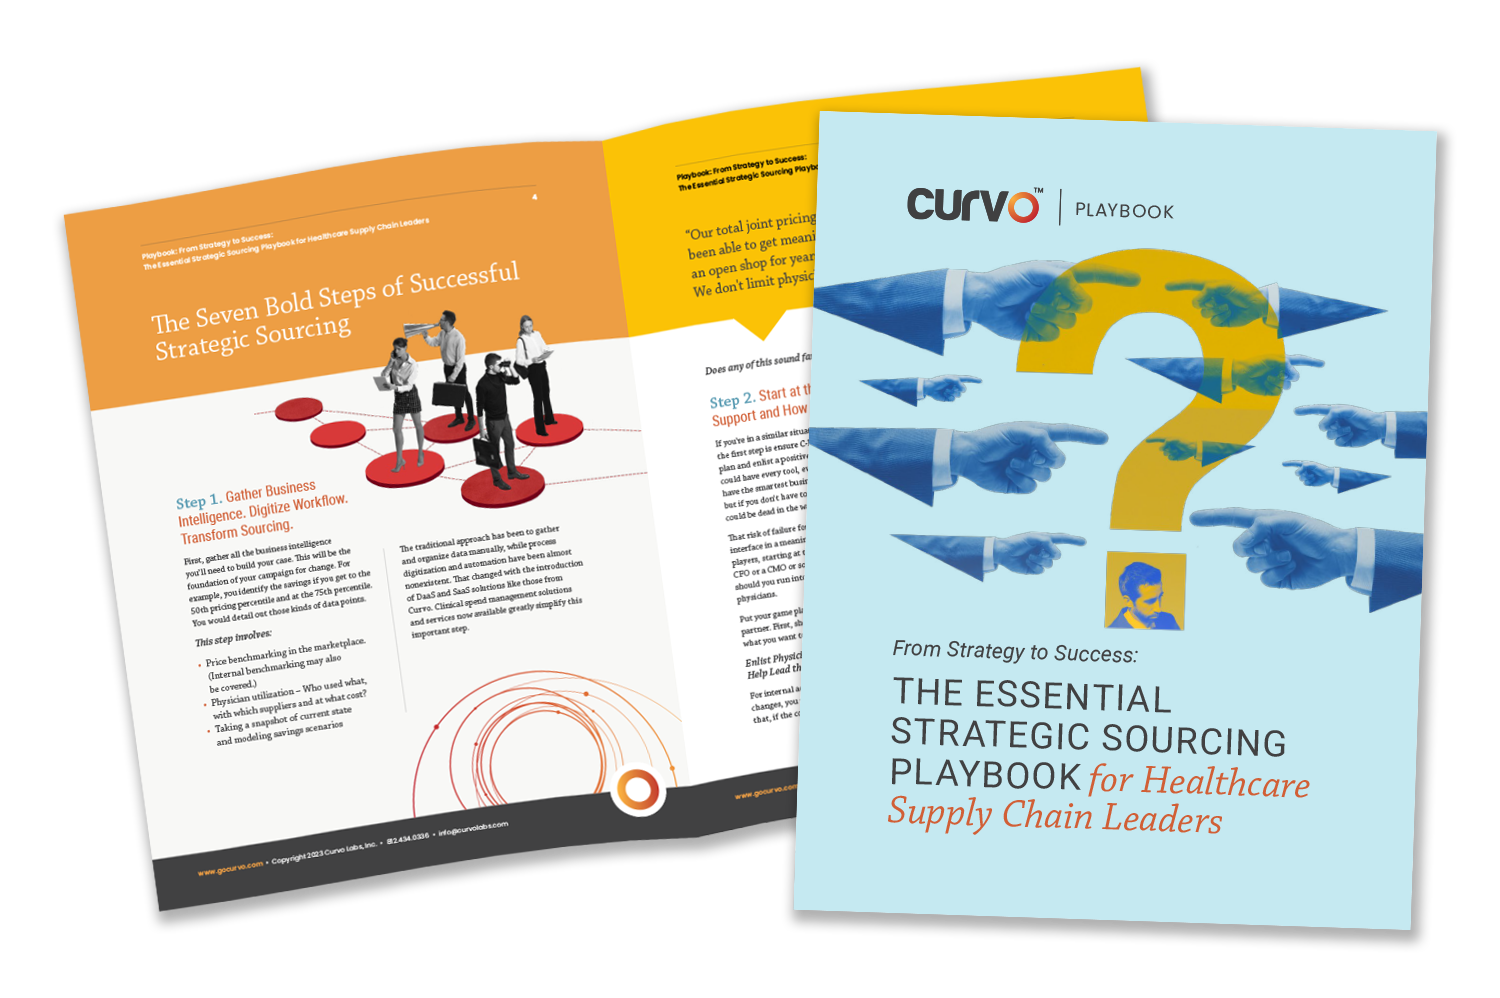 Curvo - From Strategy to Success - The Essential Strategic Sourcing Playbook for Healthcare Supply Chain Leaders  - Playbook - mockup